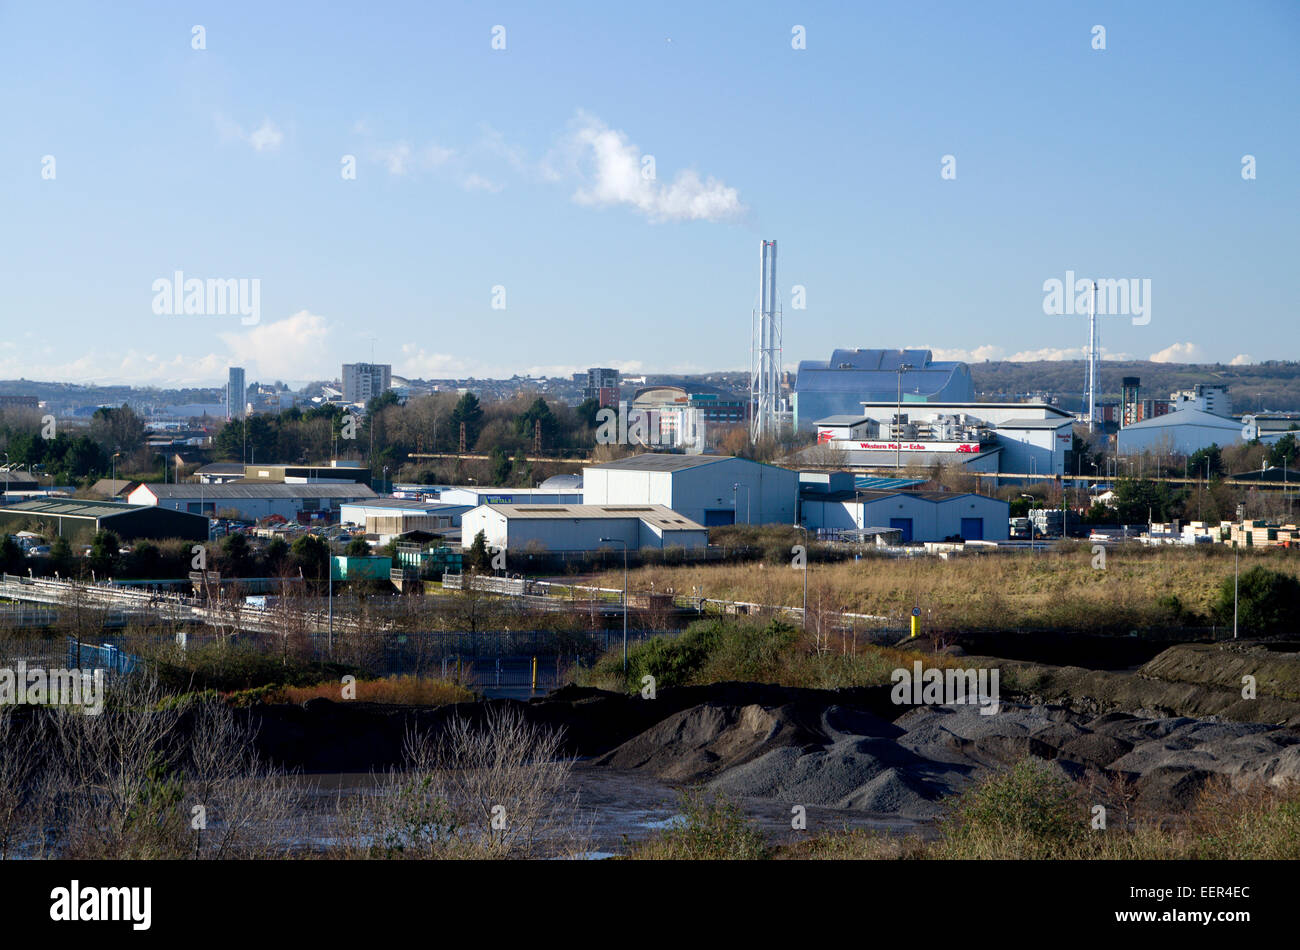 View of industrial area around Cardiff Docks, Cardiff, Wales, UK. Stock Photo